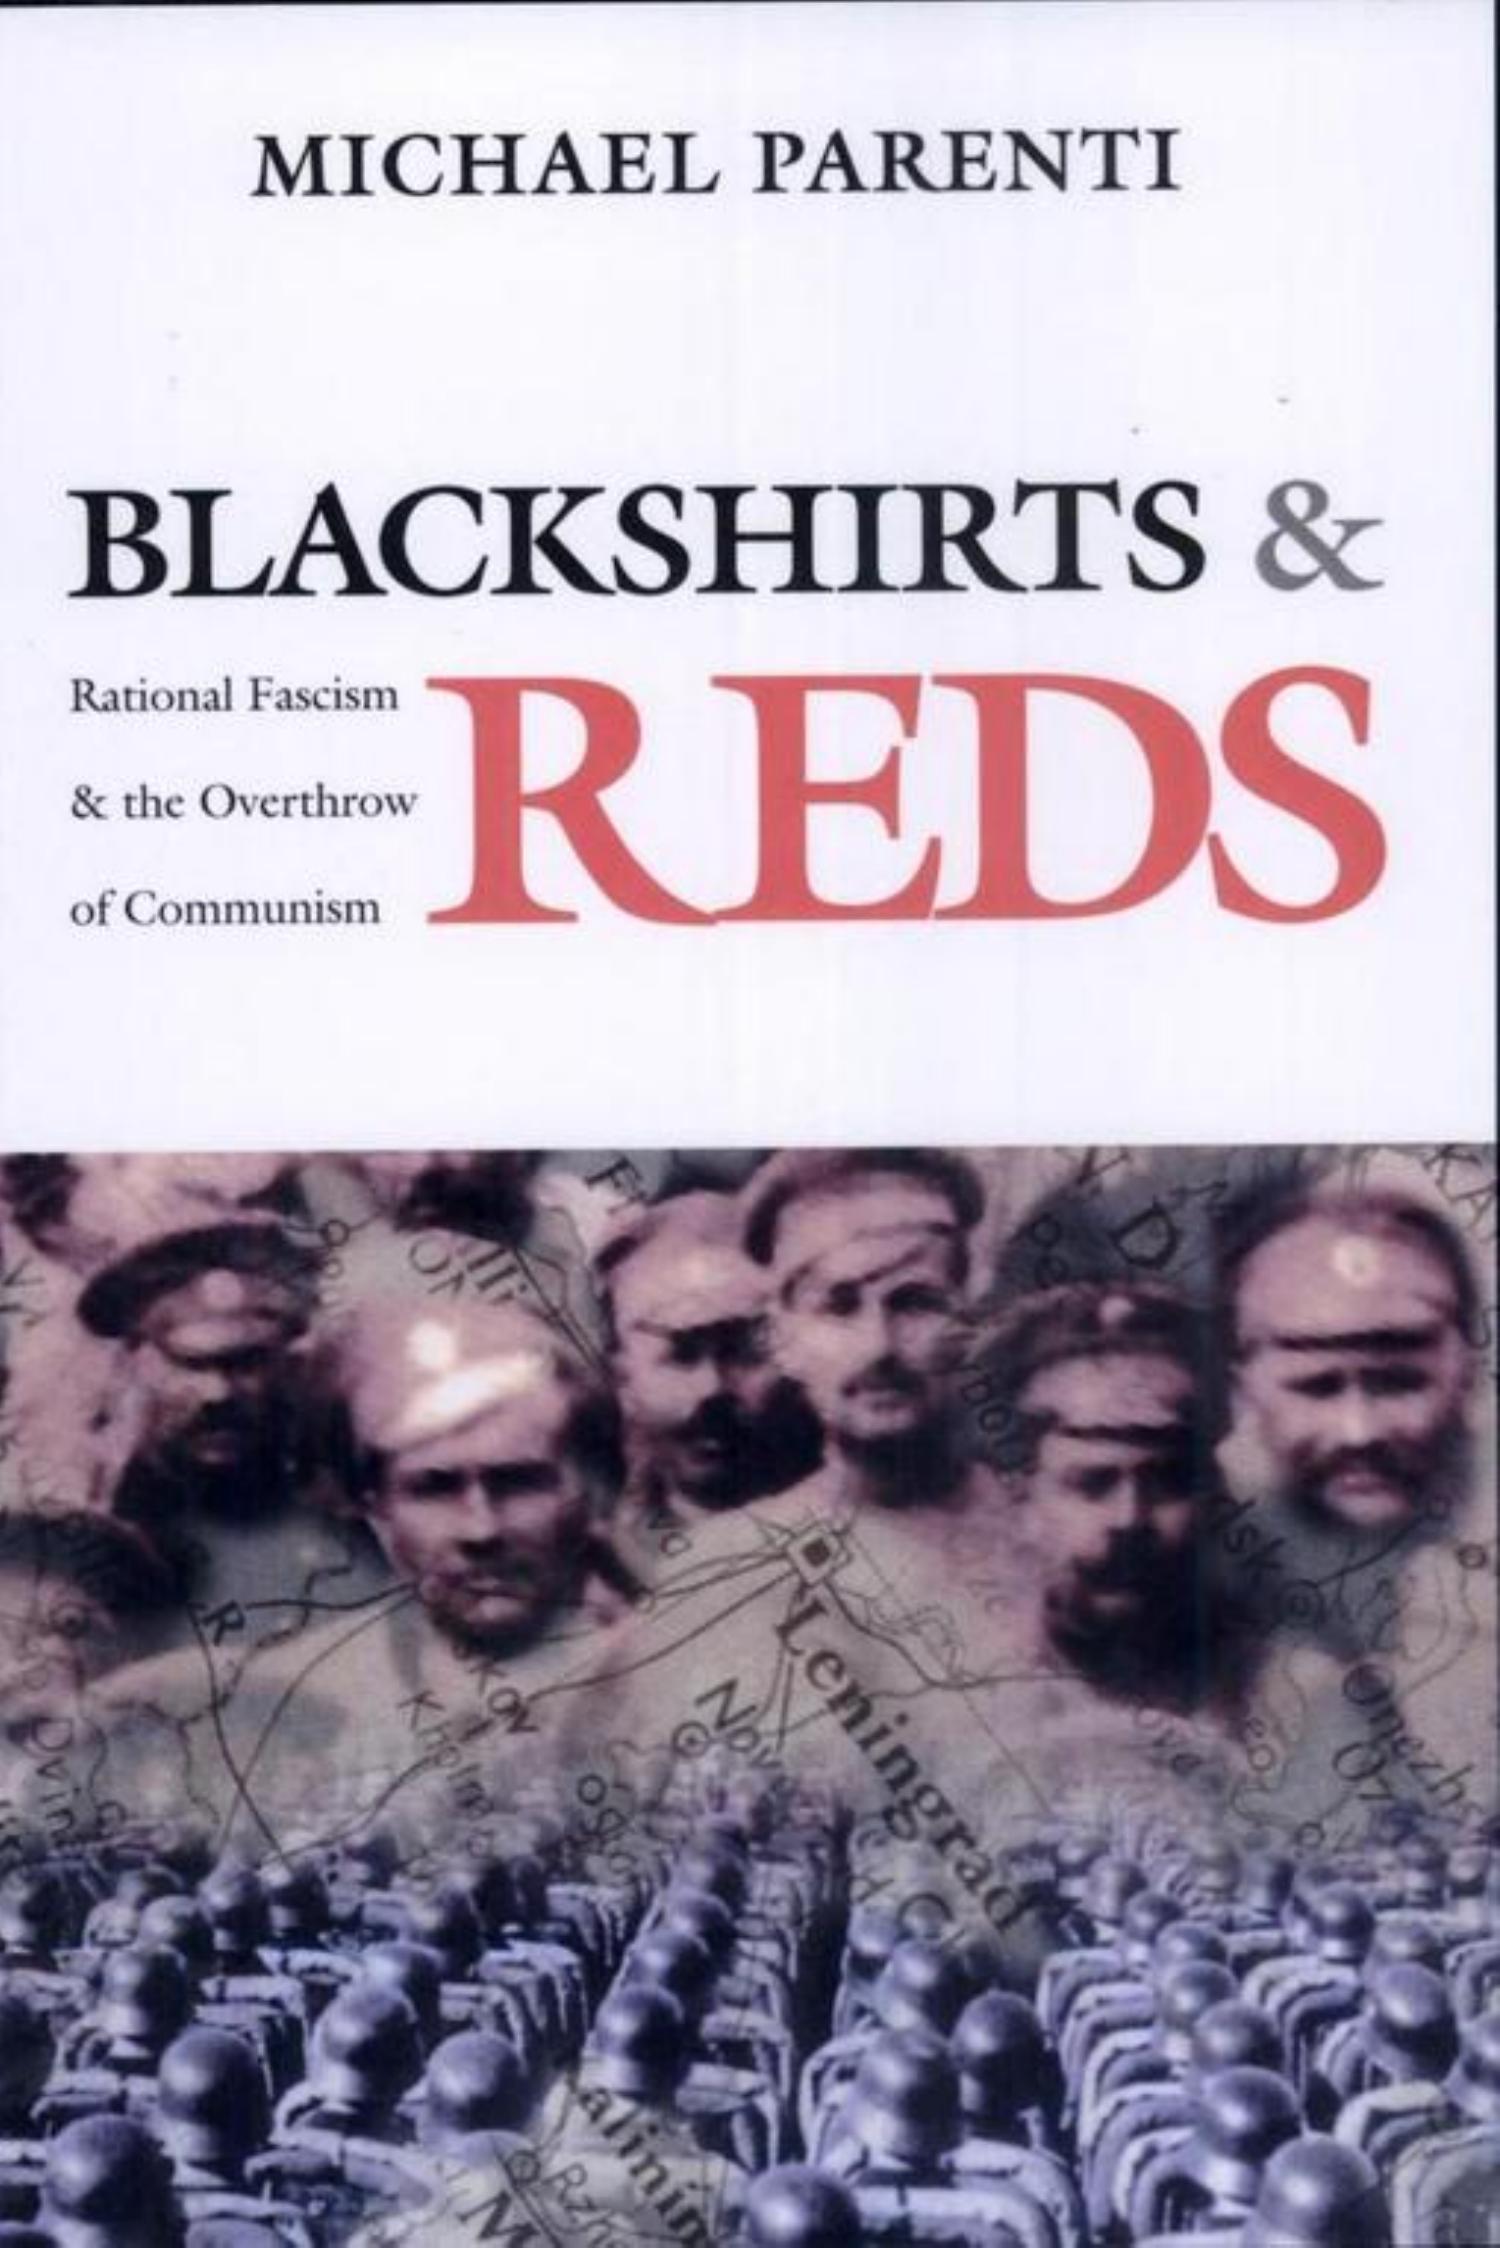 Blackshirts and Reds by Michael Parenti